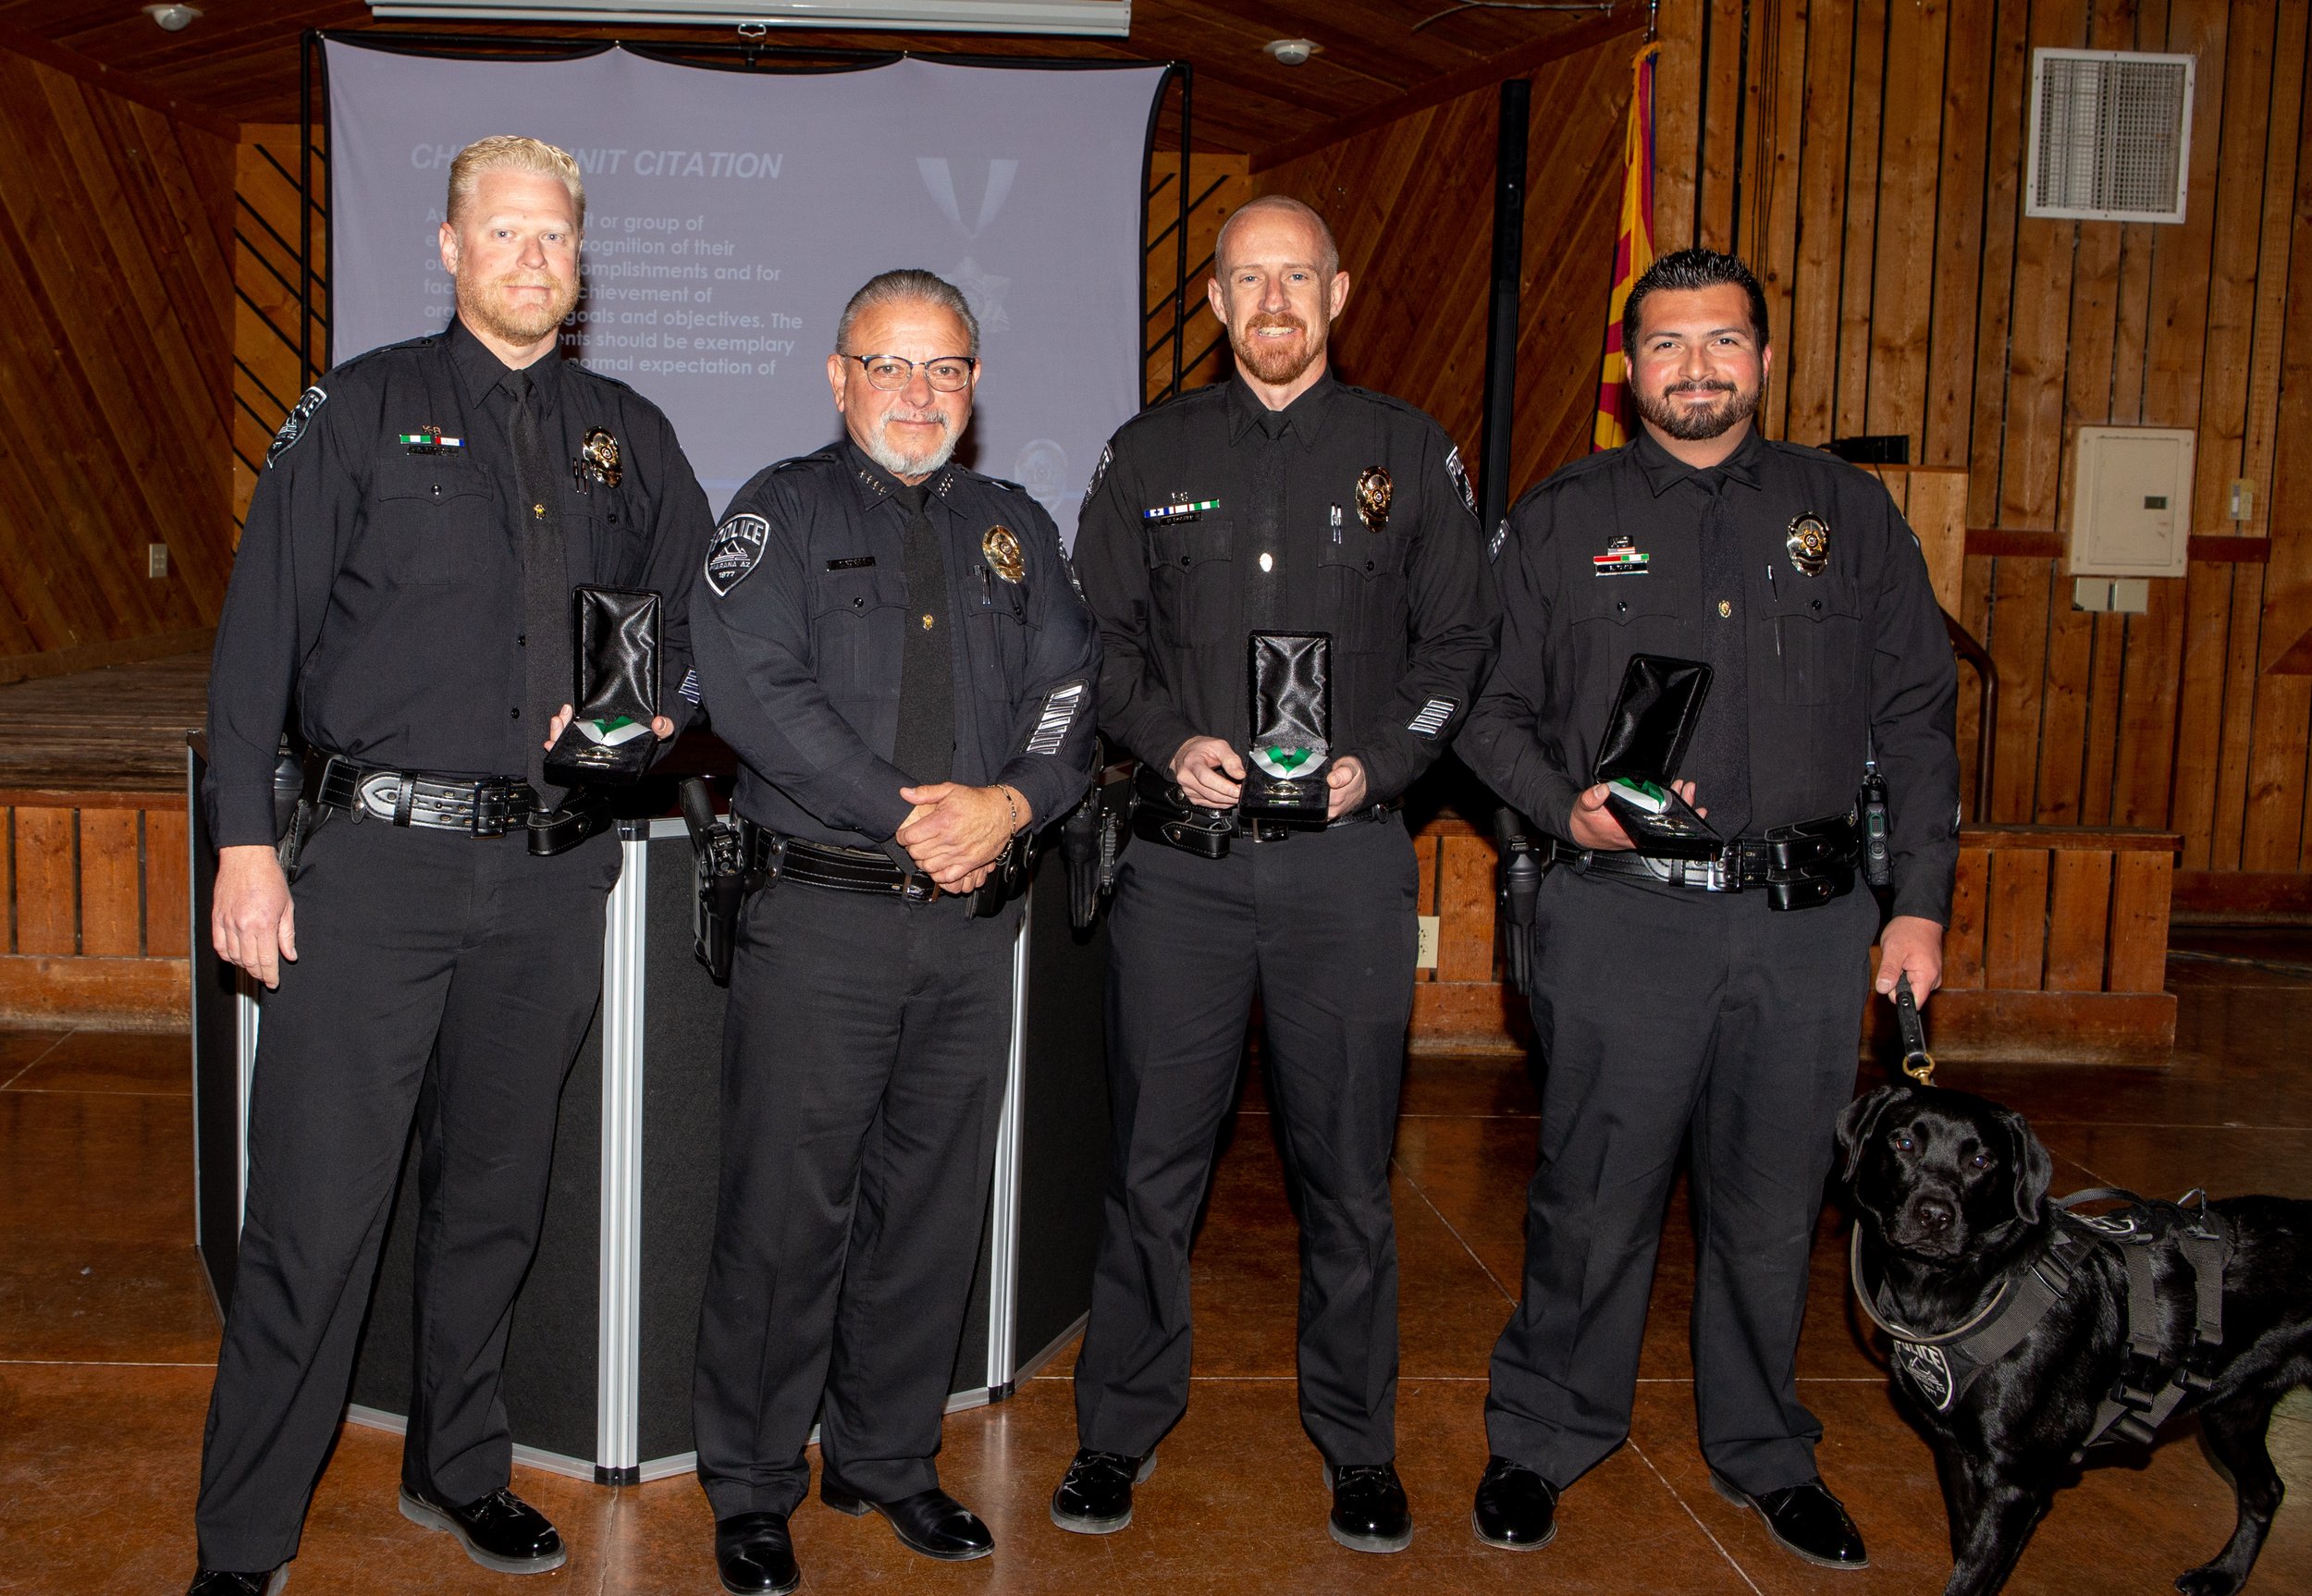  K9 Unit: Officers Brad Barton, Hayden Mosher and Gabe Tapia 